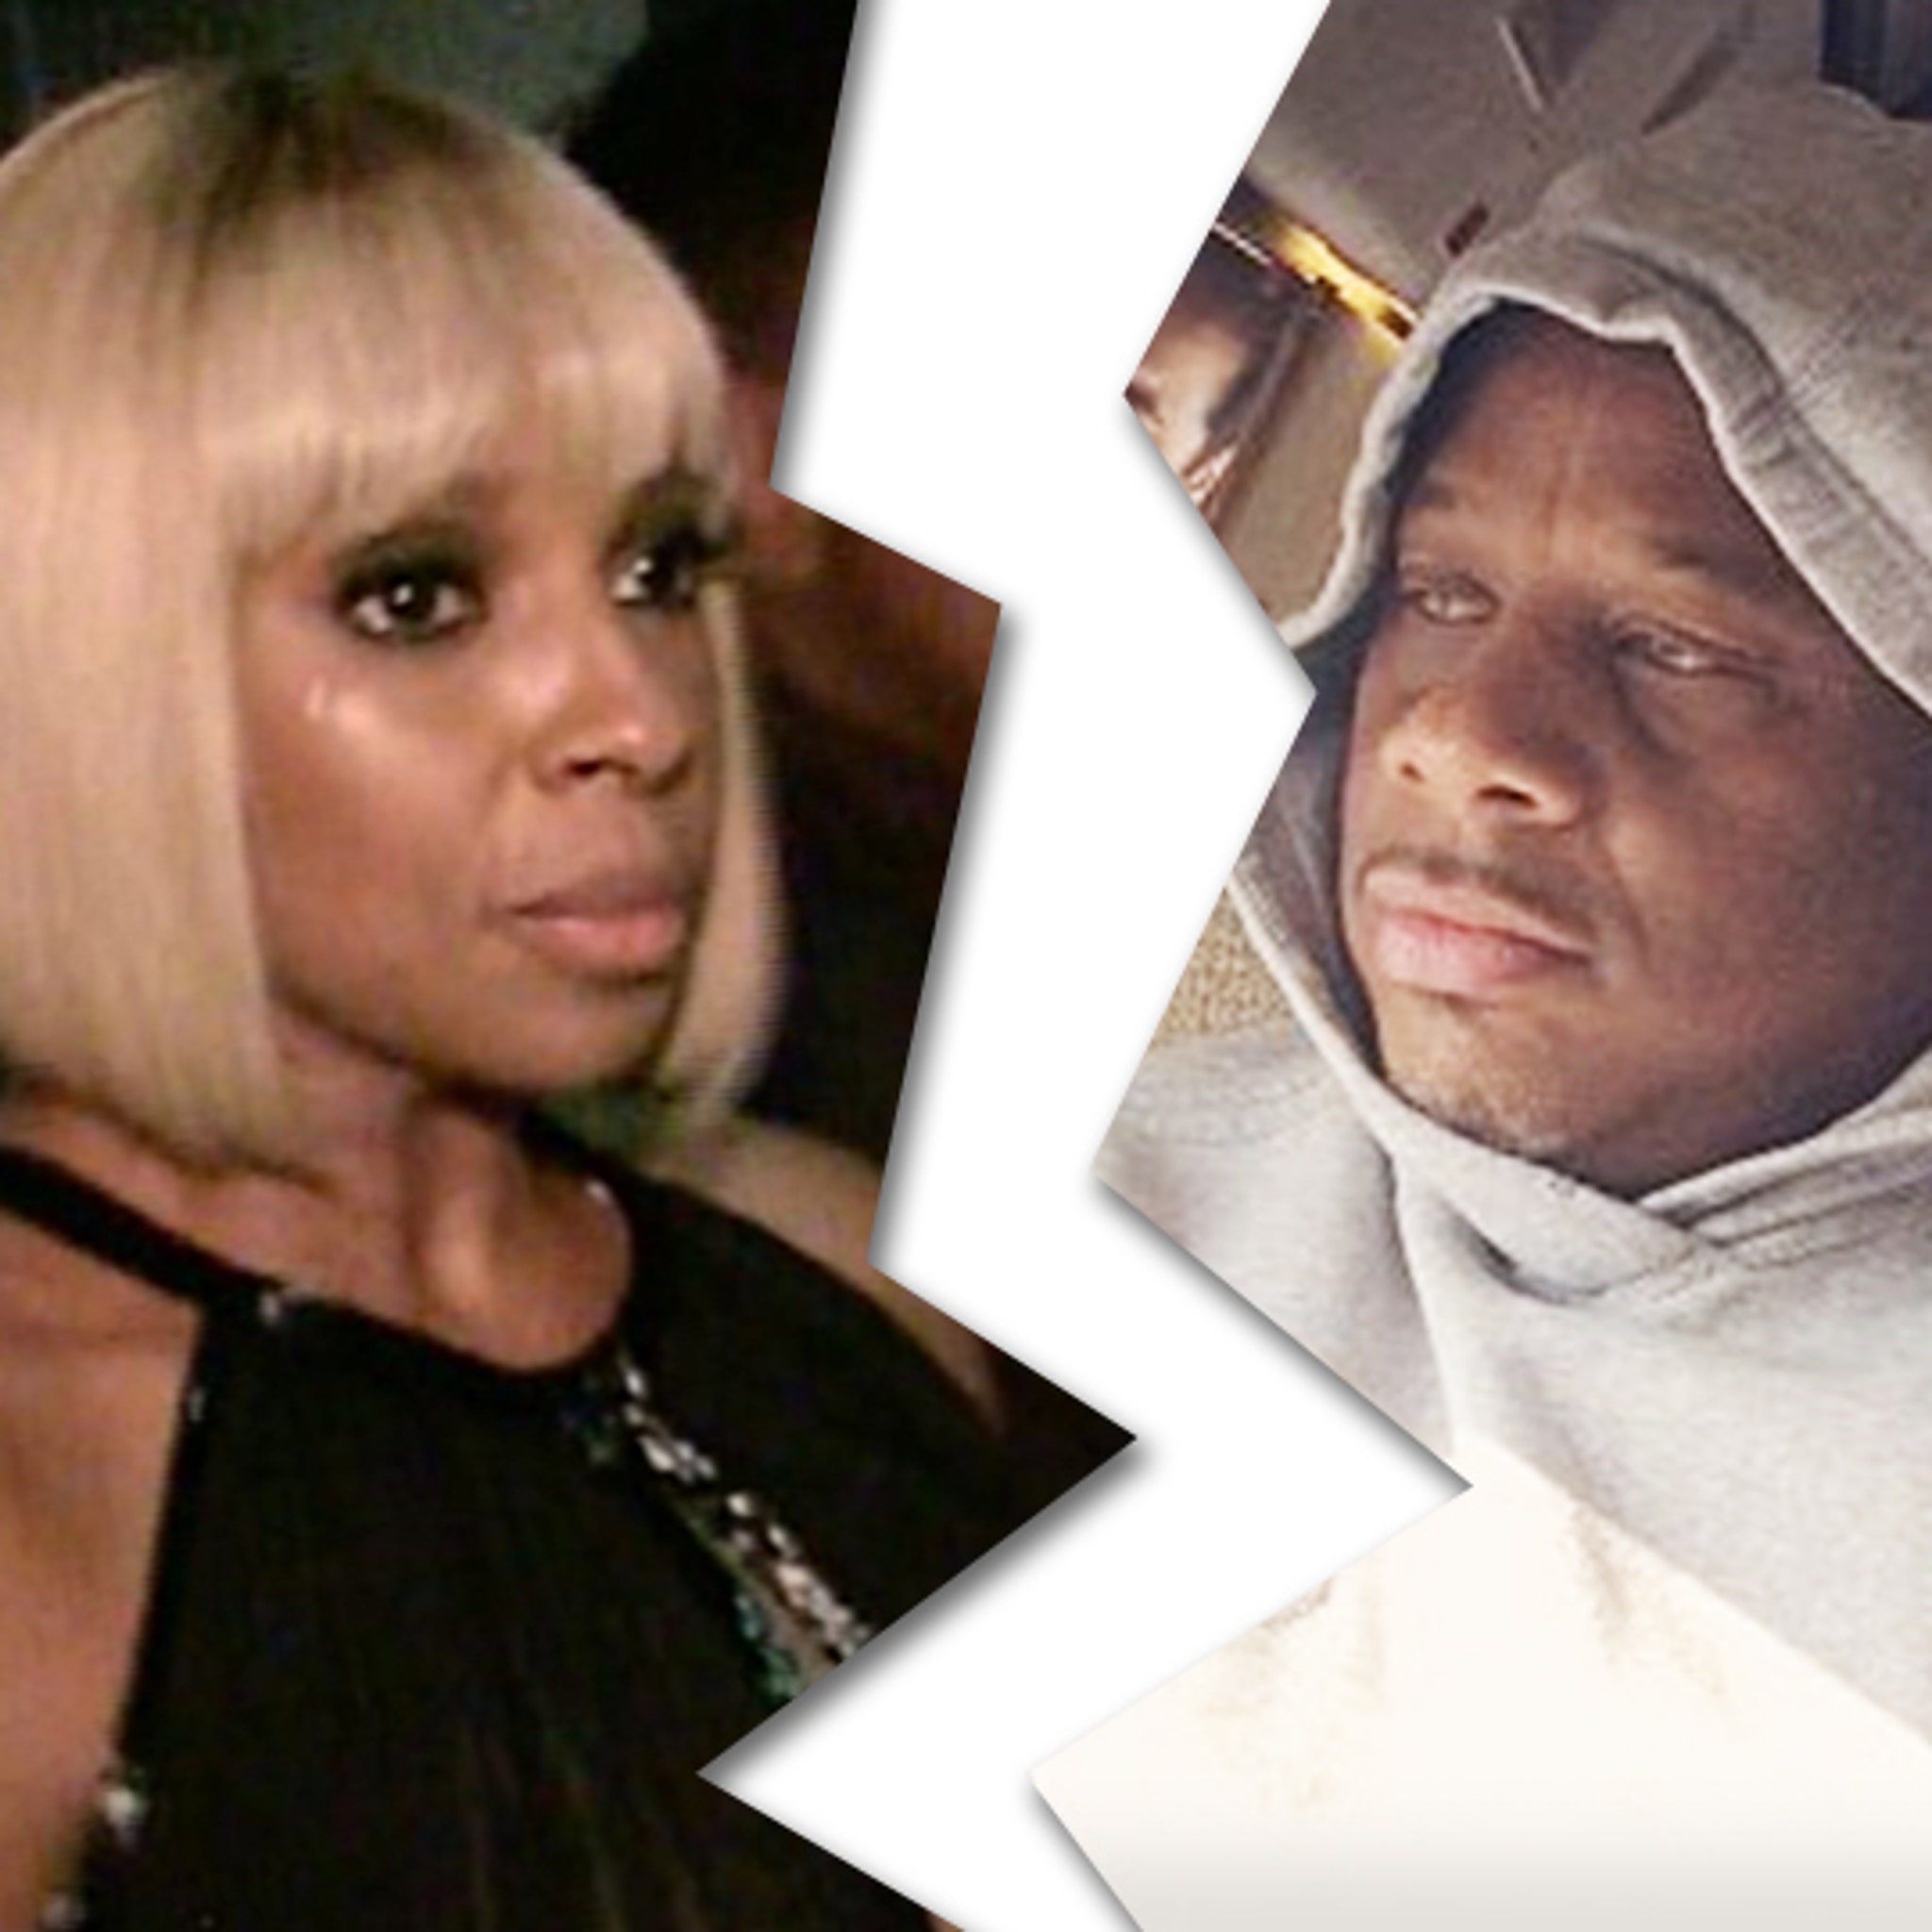 why did mary j blige divorce her husband